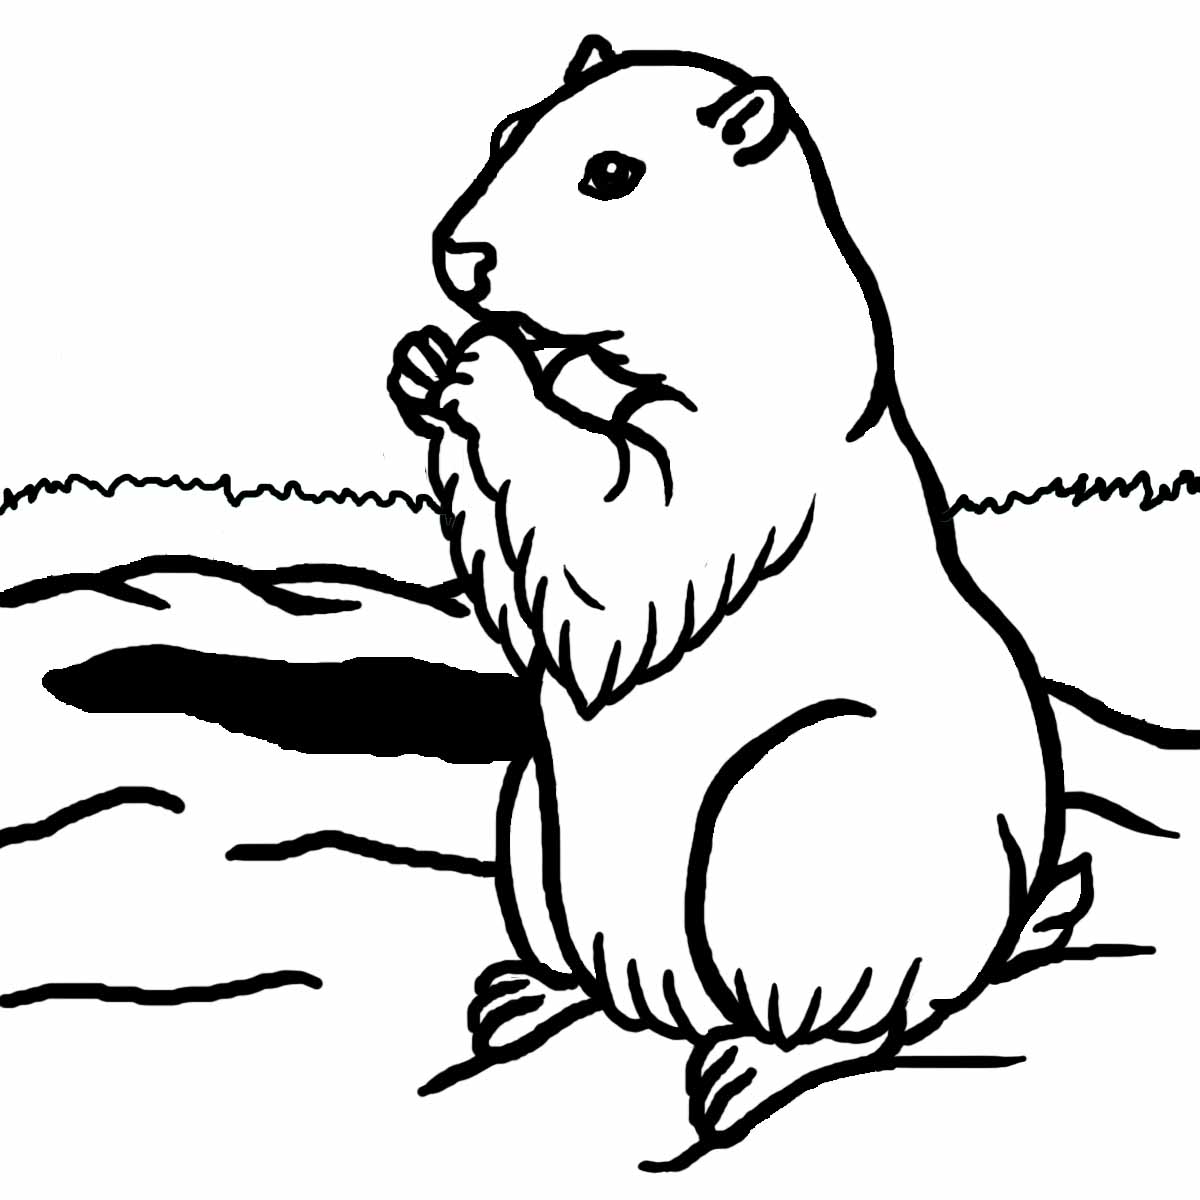 Groundhog Shadow Clipart Images & Pictures - Becuo